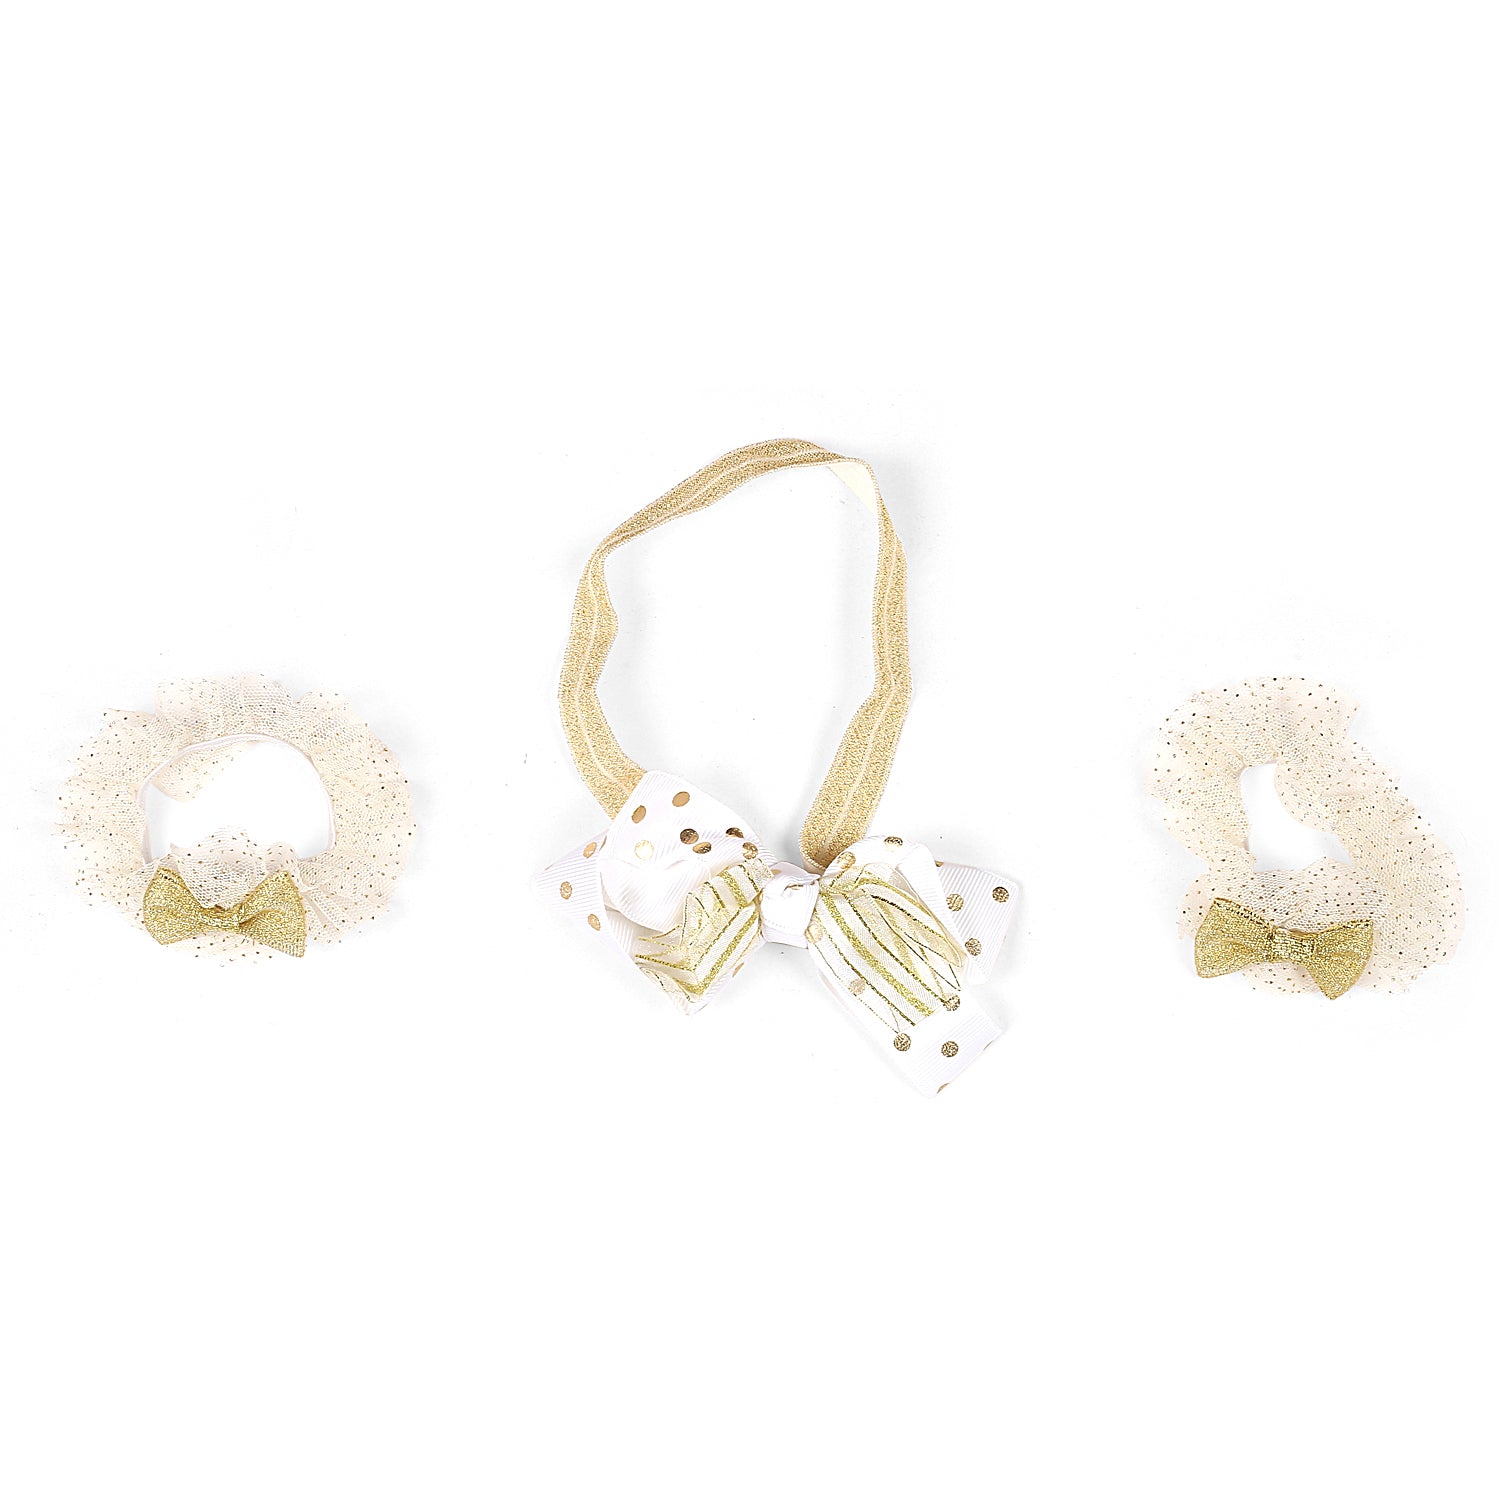 Fairy White And Golden Tutu Skirt And Accessory Set